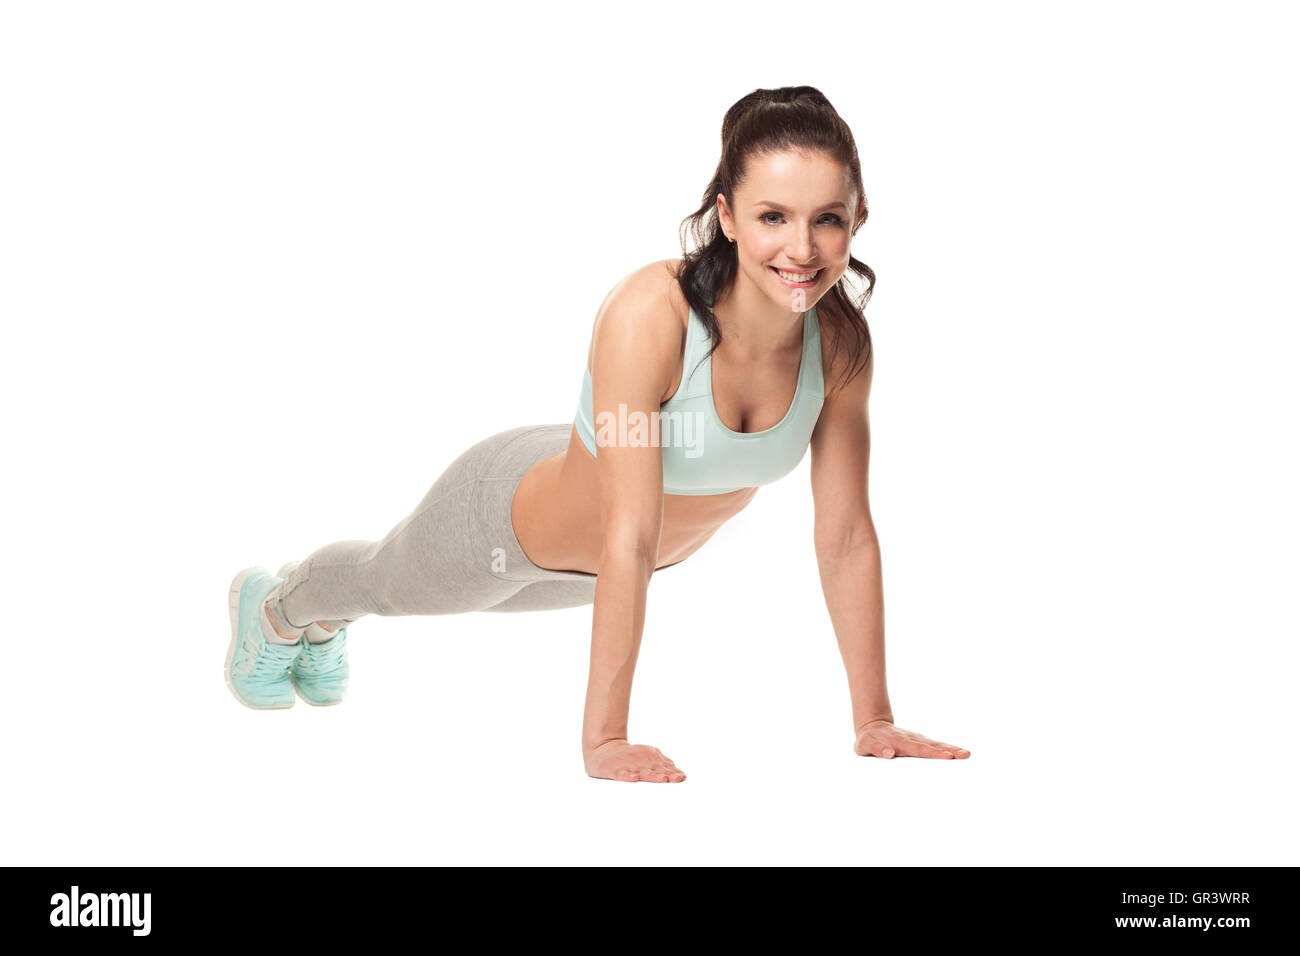 athletic woman doing push-ups on a white background. Fitness model with a beautiful, athletic body Stock Photo